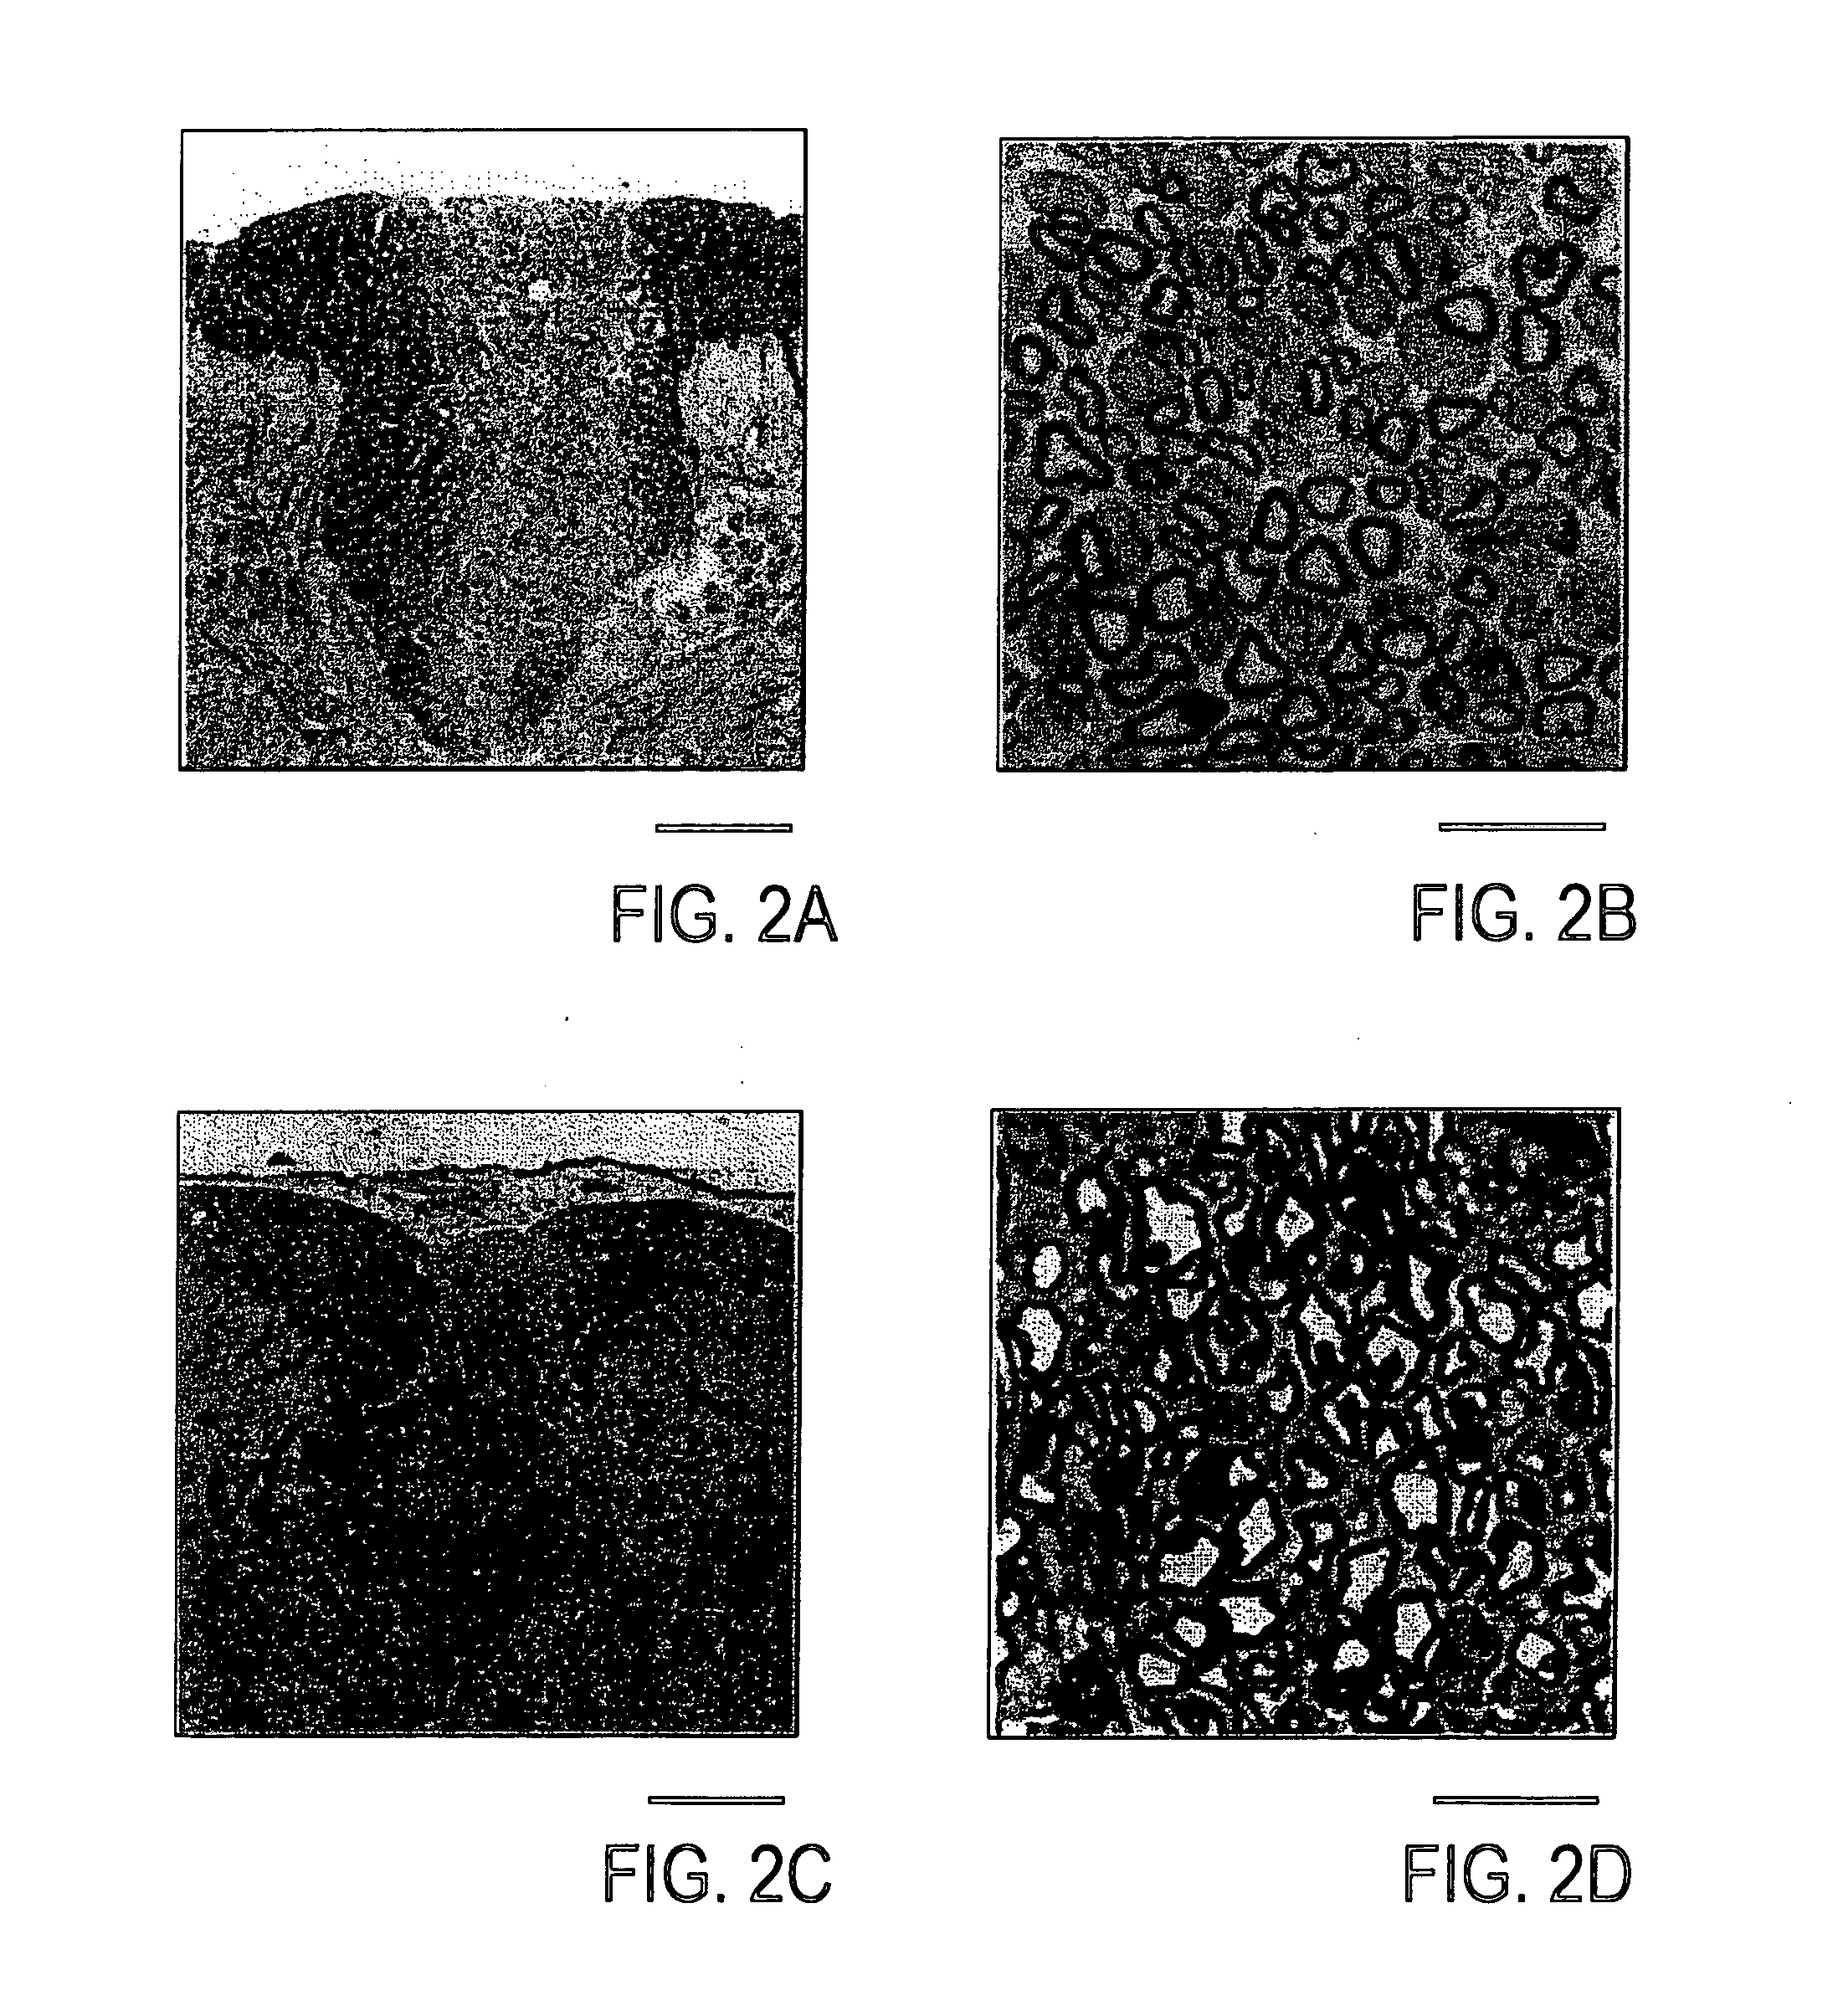 Cell fractions containing cells capable of differentiating into neural cells